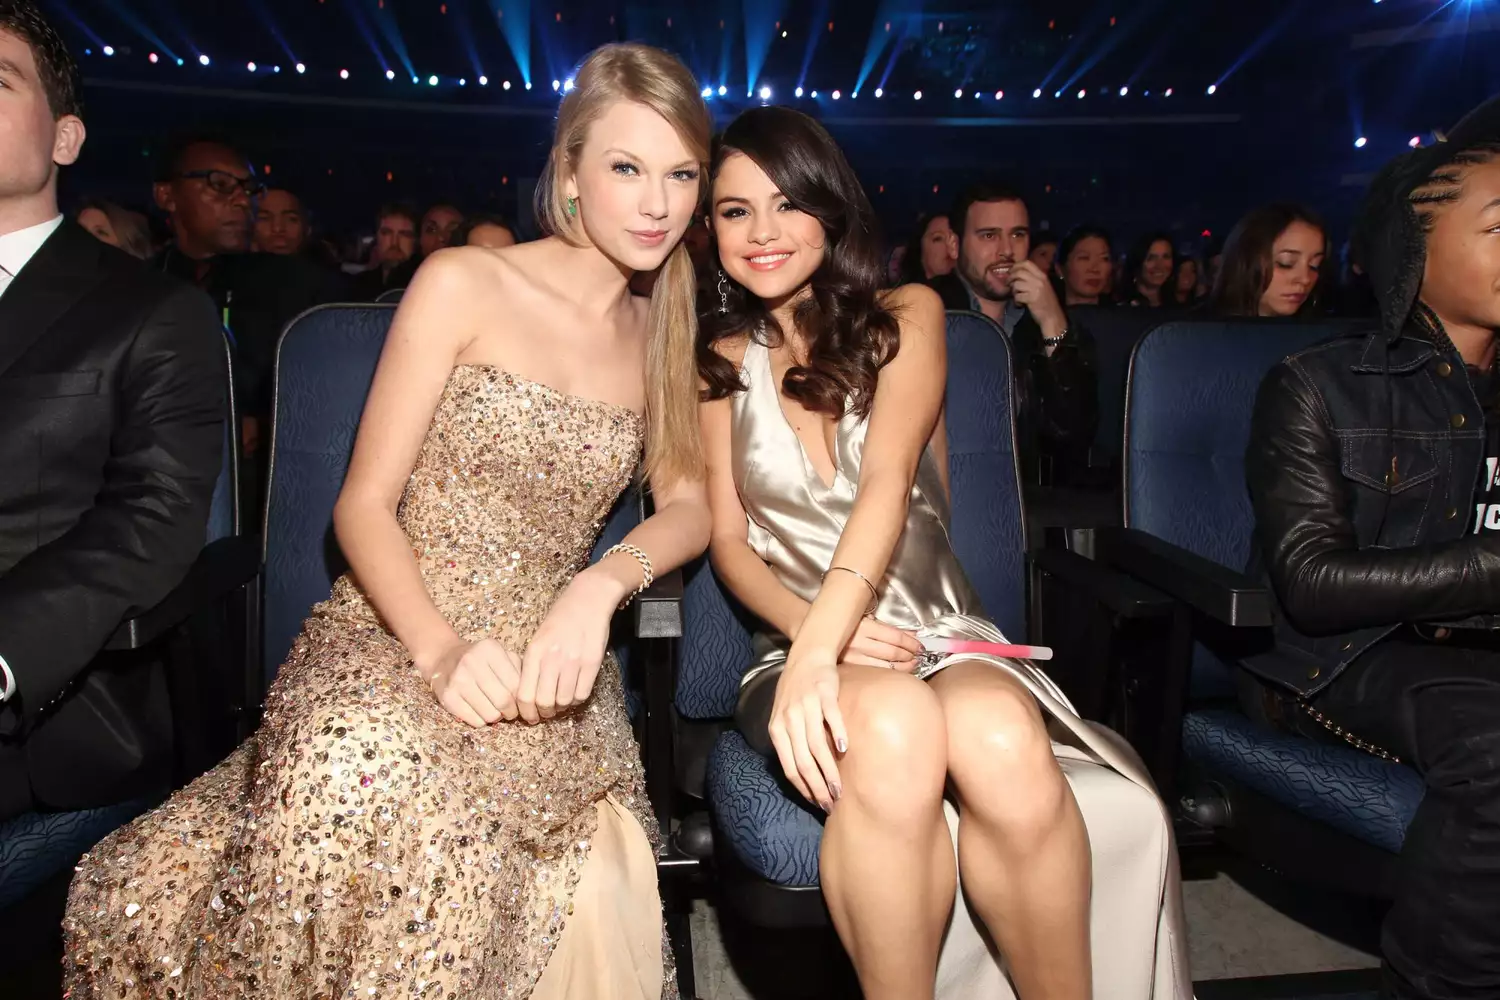 LOS ANGELES, CA - NOVEMBER 20: Singers Taylor Swift (L) and Selena Gomez at the 2011 American Music Awards held at Nokia Theatre L.A. LIVE on November 20, 2011 in Los Angeles, California. (Photo by Christopher Polk/AMA2011/Getty Images for AMA)